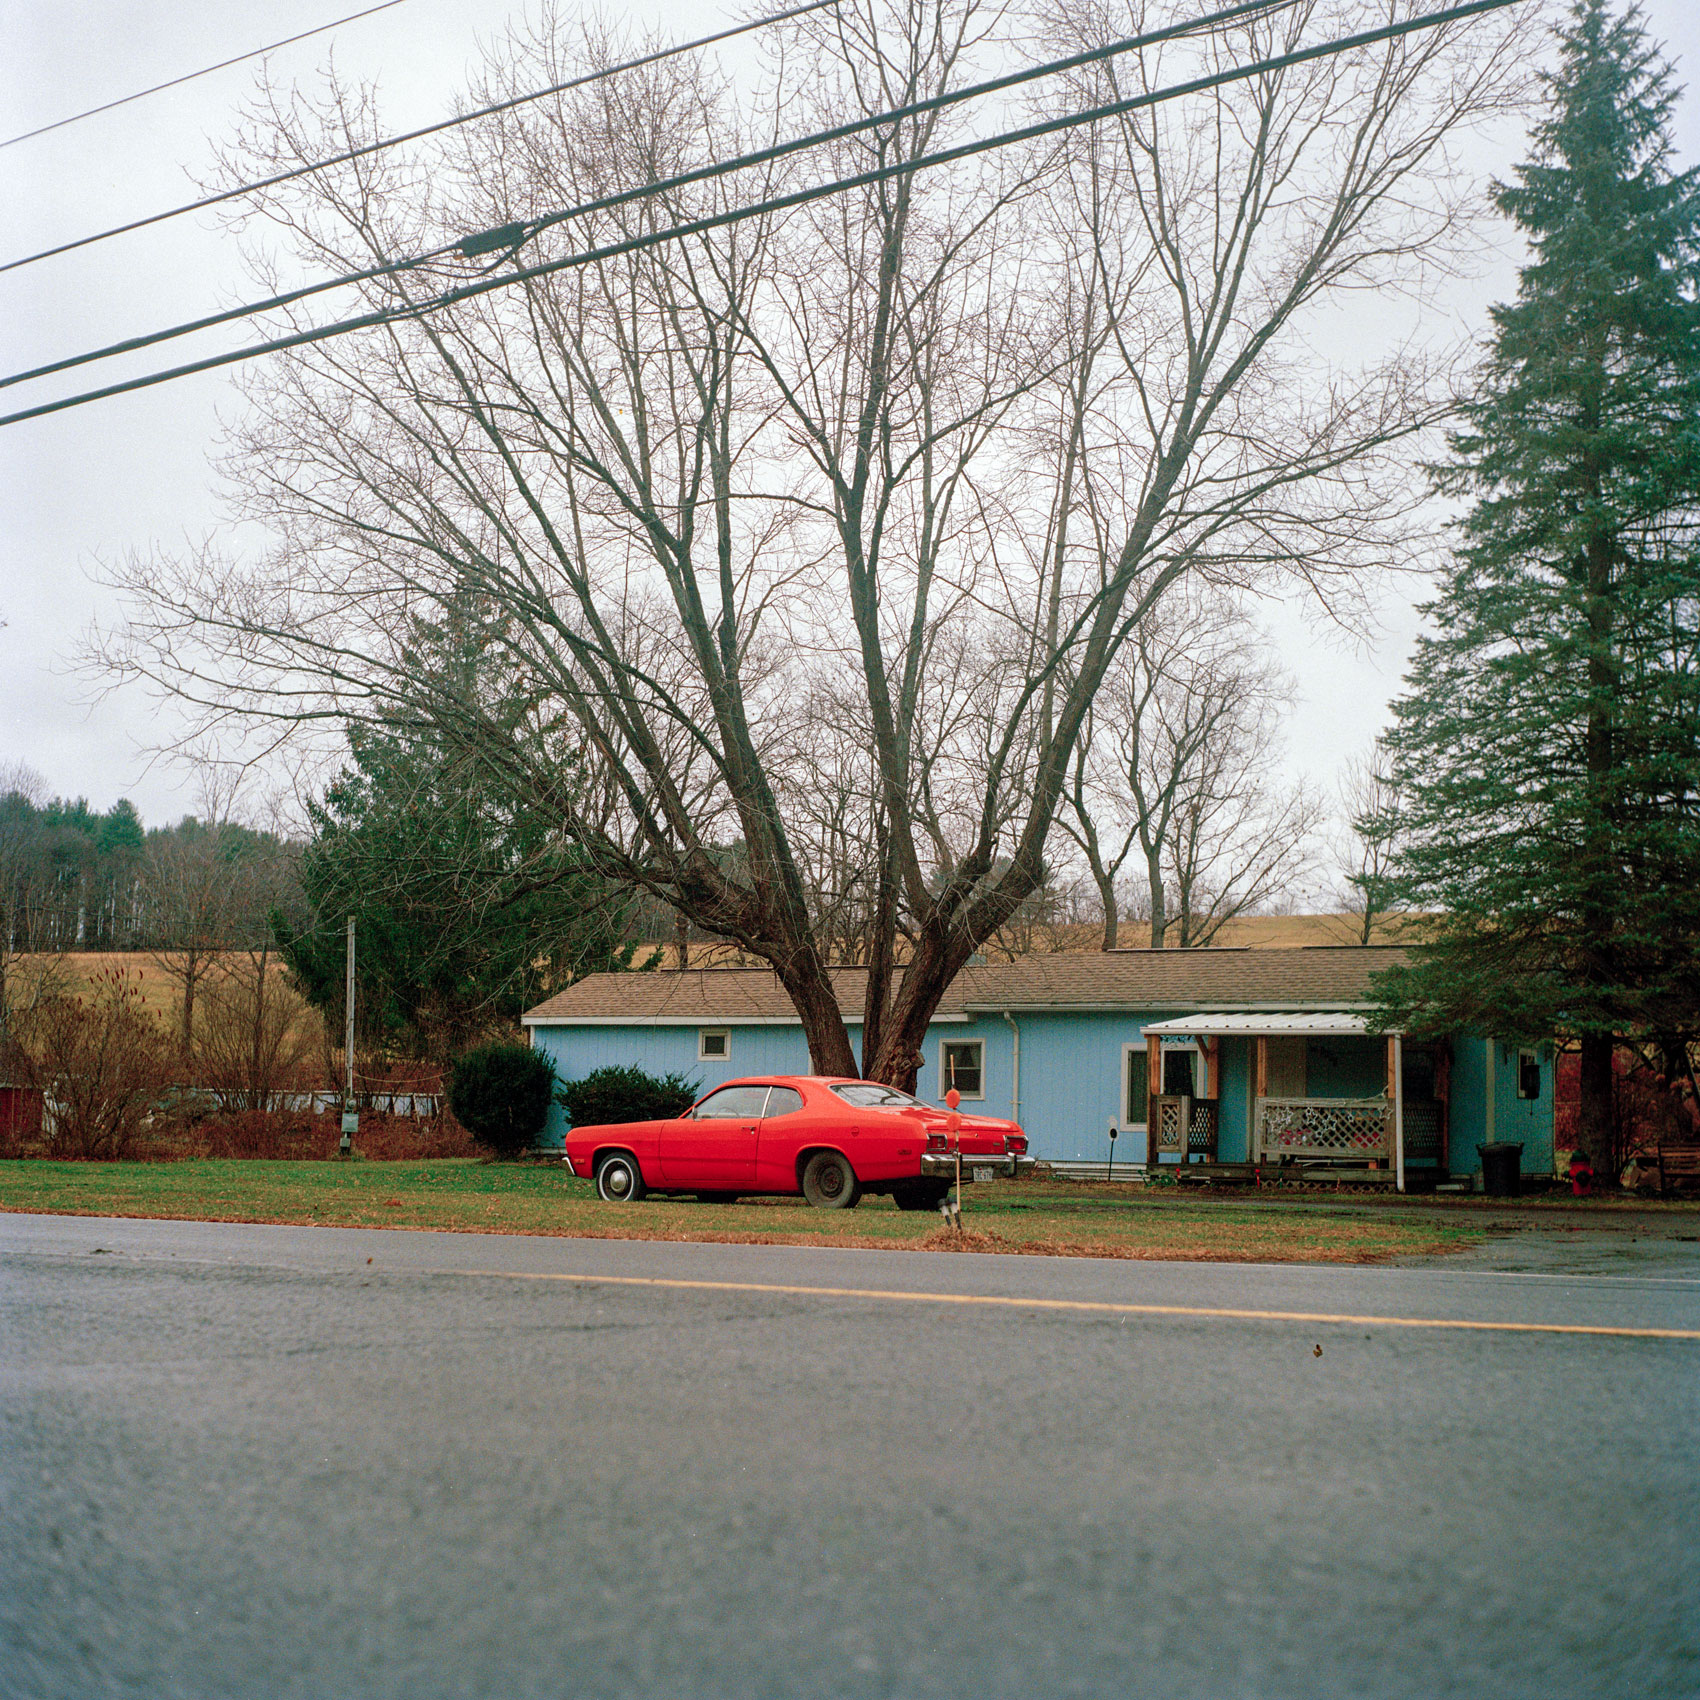 A vintage car sits in the front yard in upstate New York